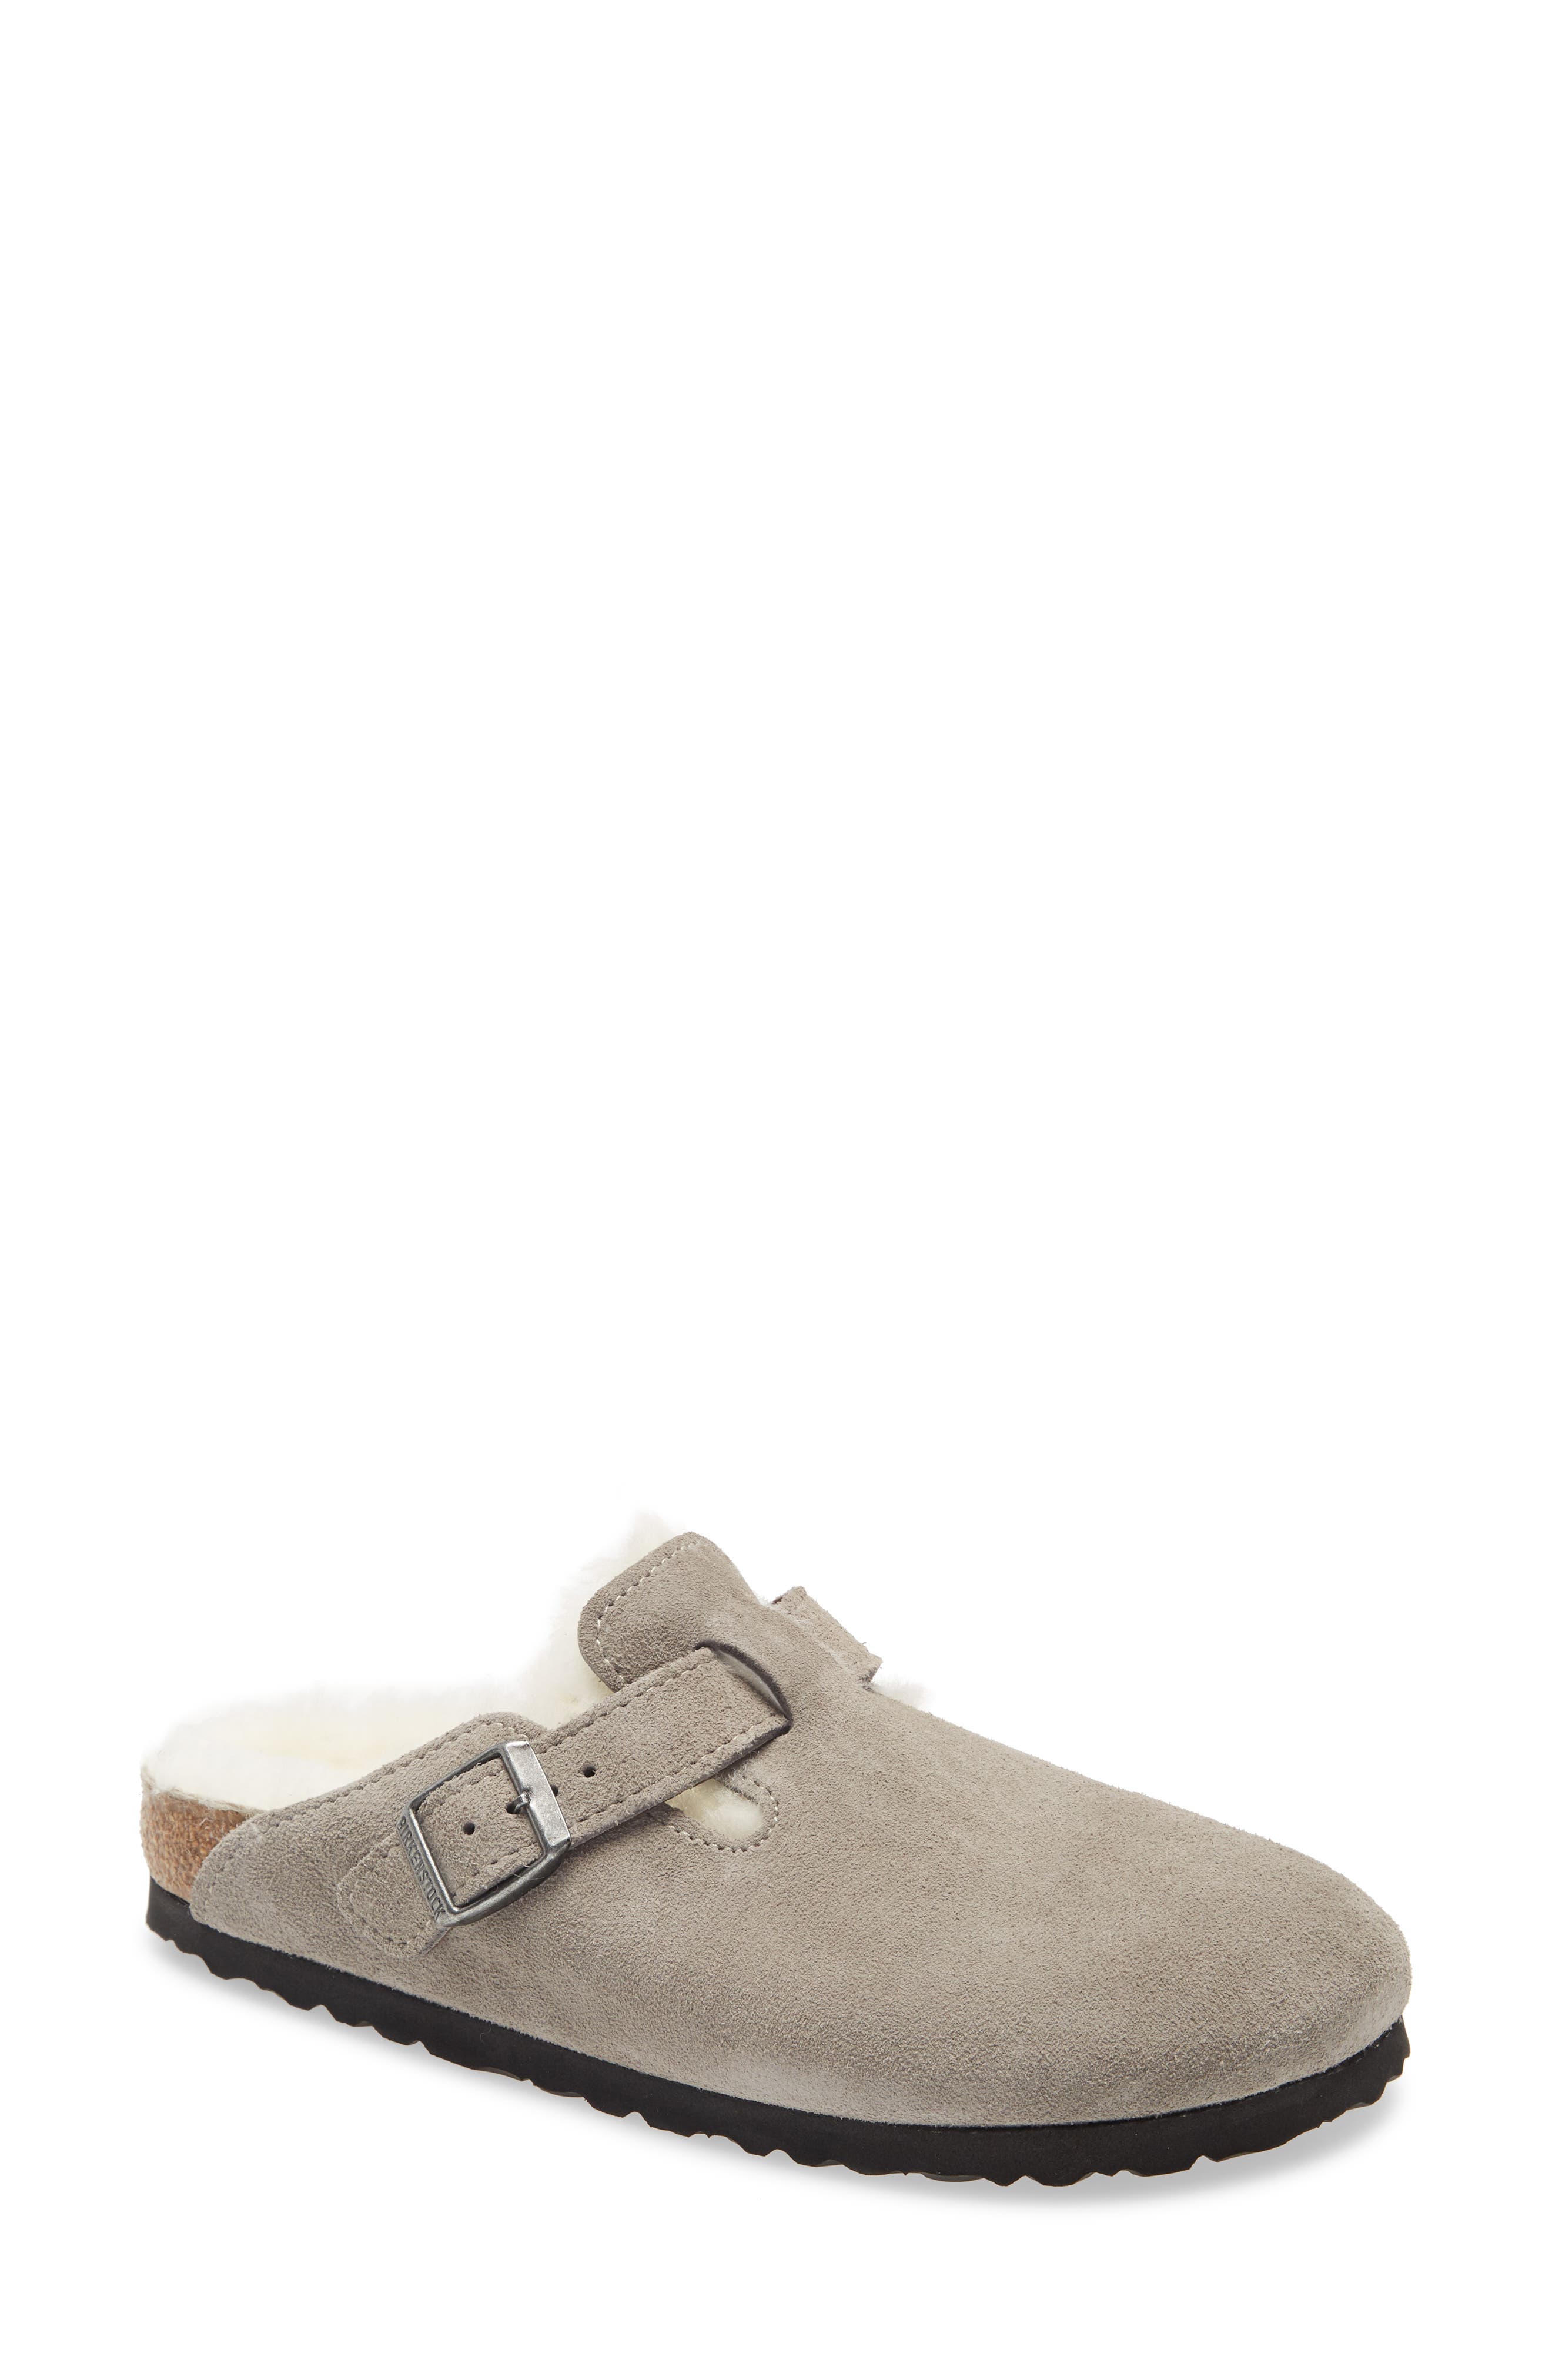 clogs mules womens shoes